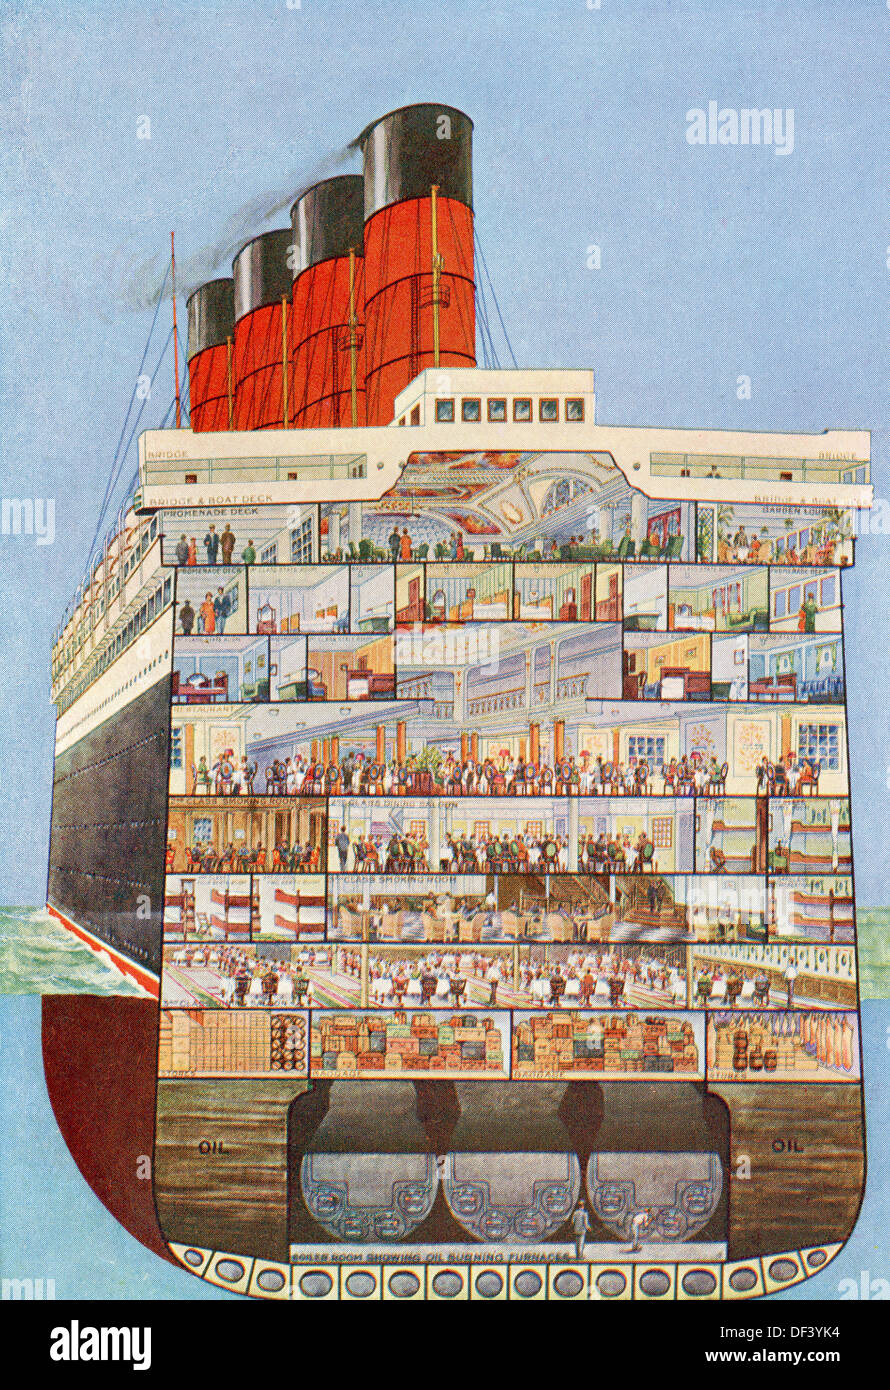 The Interior of the RMS Aquitania. From The Romance of the Merchant Ship, published 1931. Stock Photo